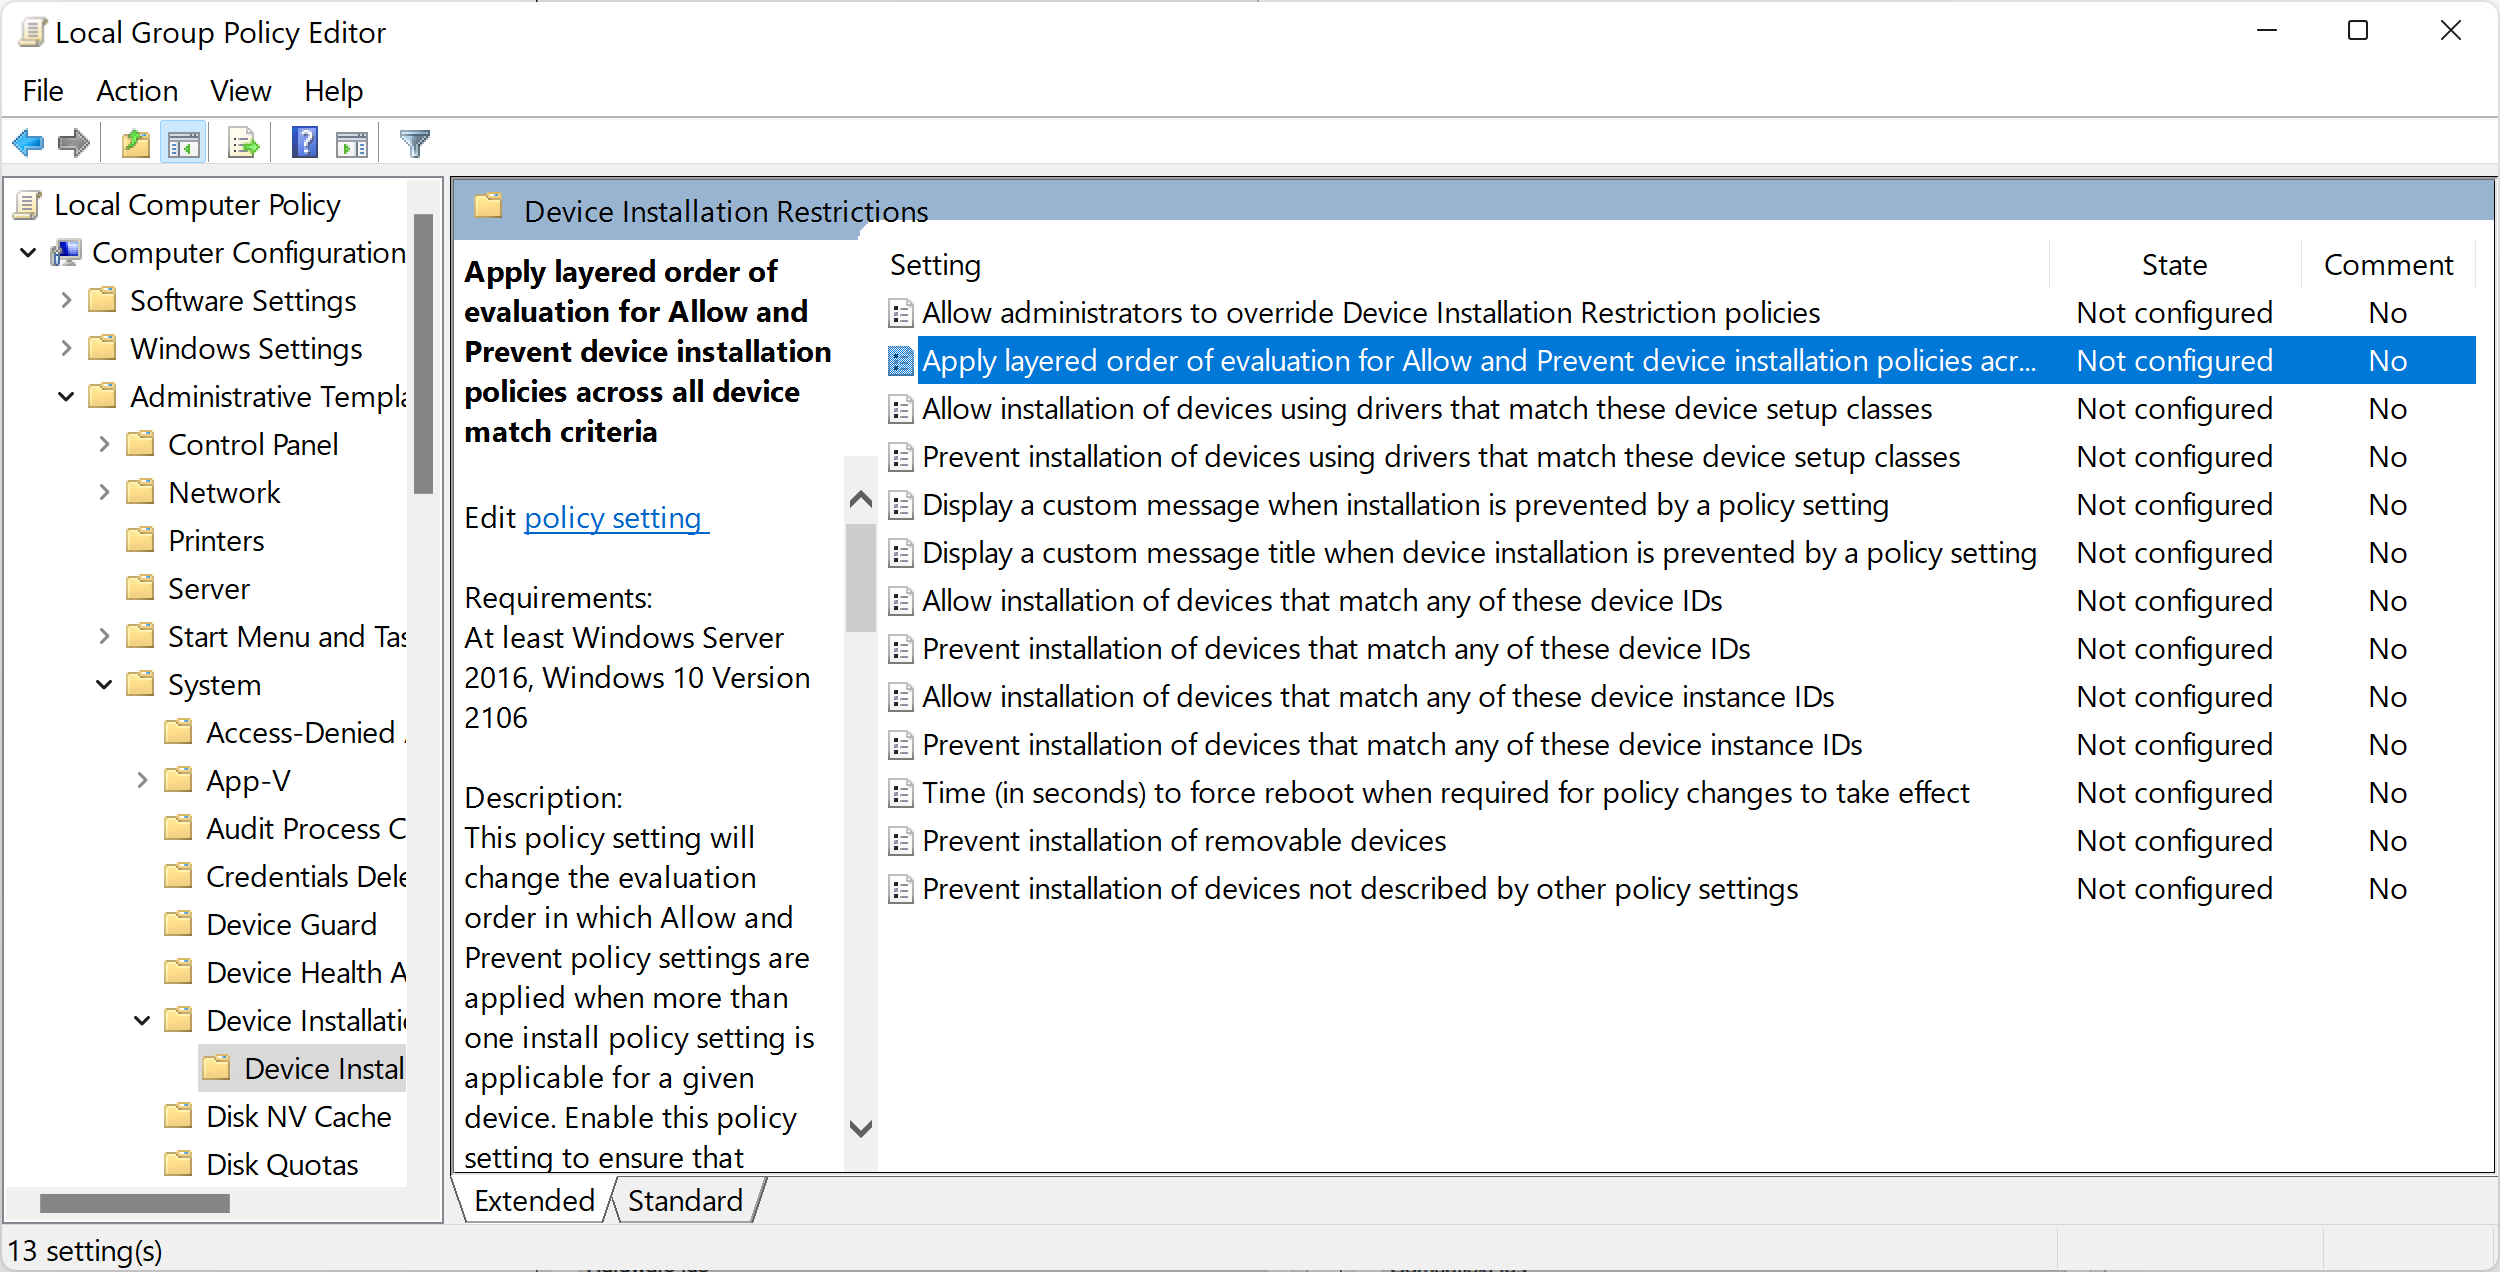 Local Group Policy Editor interface